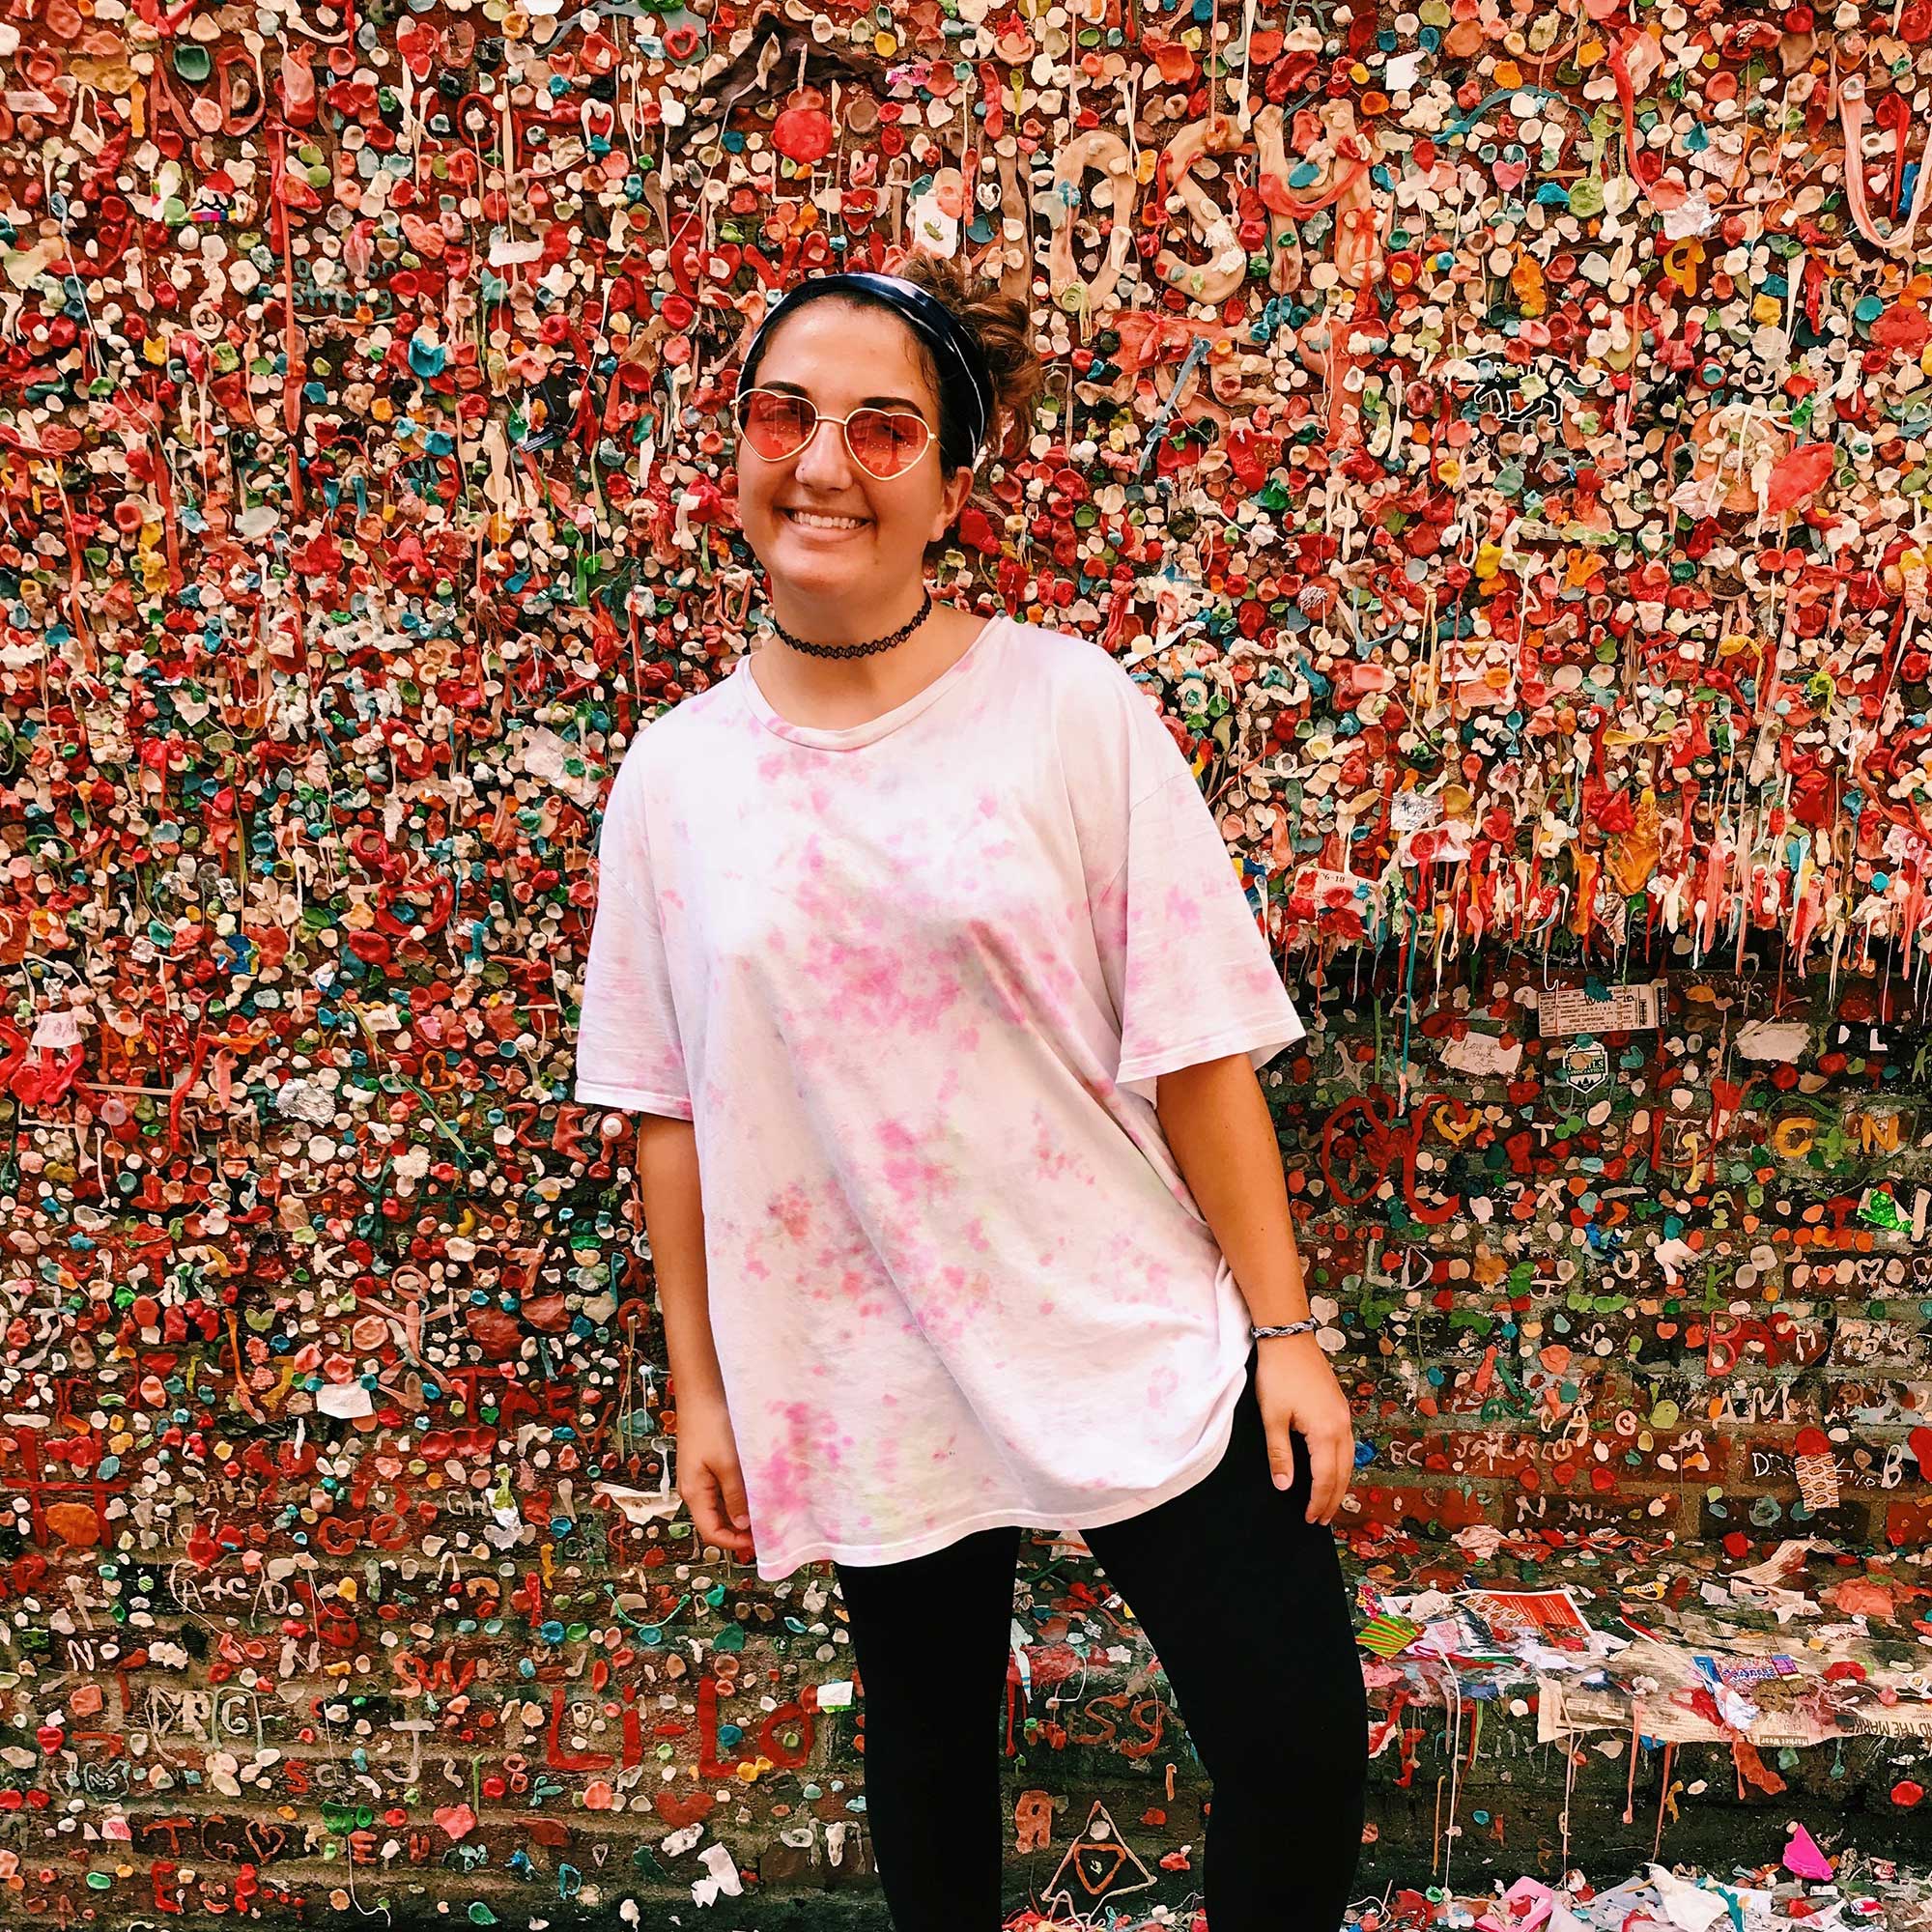 Savannah in sunglasses in front of a brick wall covered in colorful chewing gum